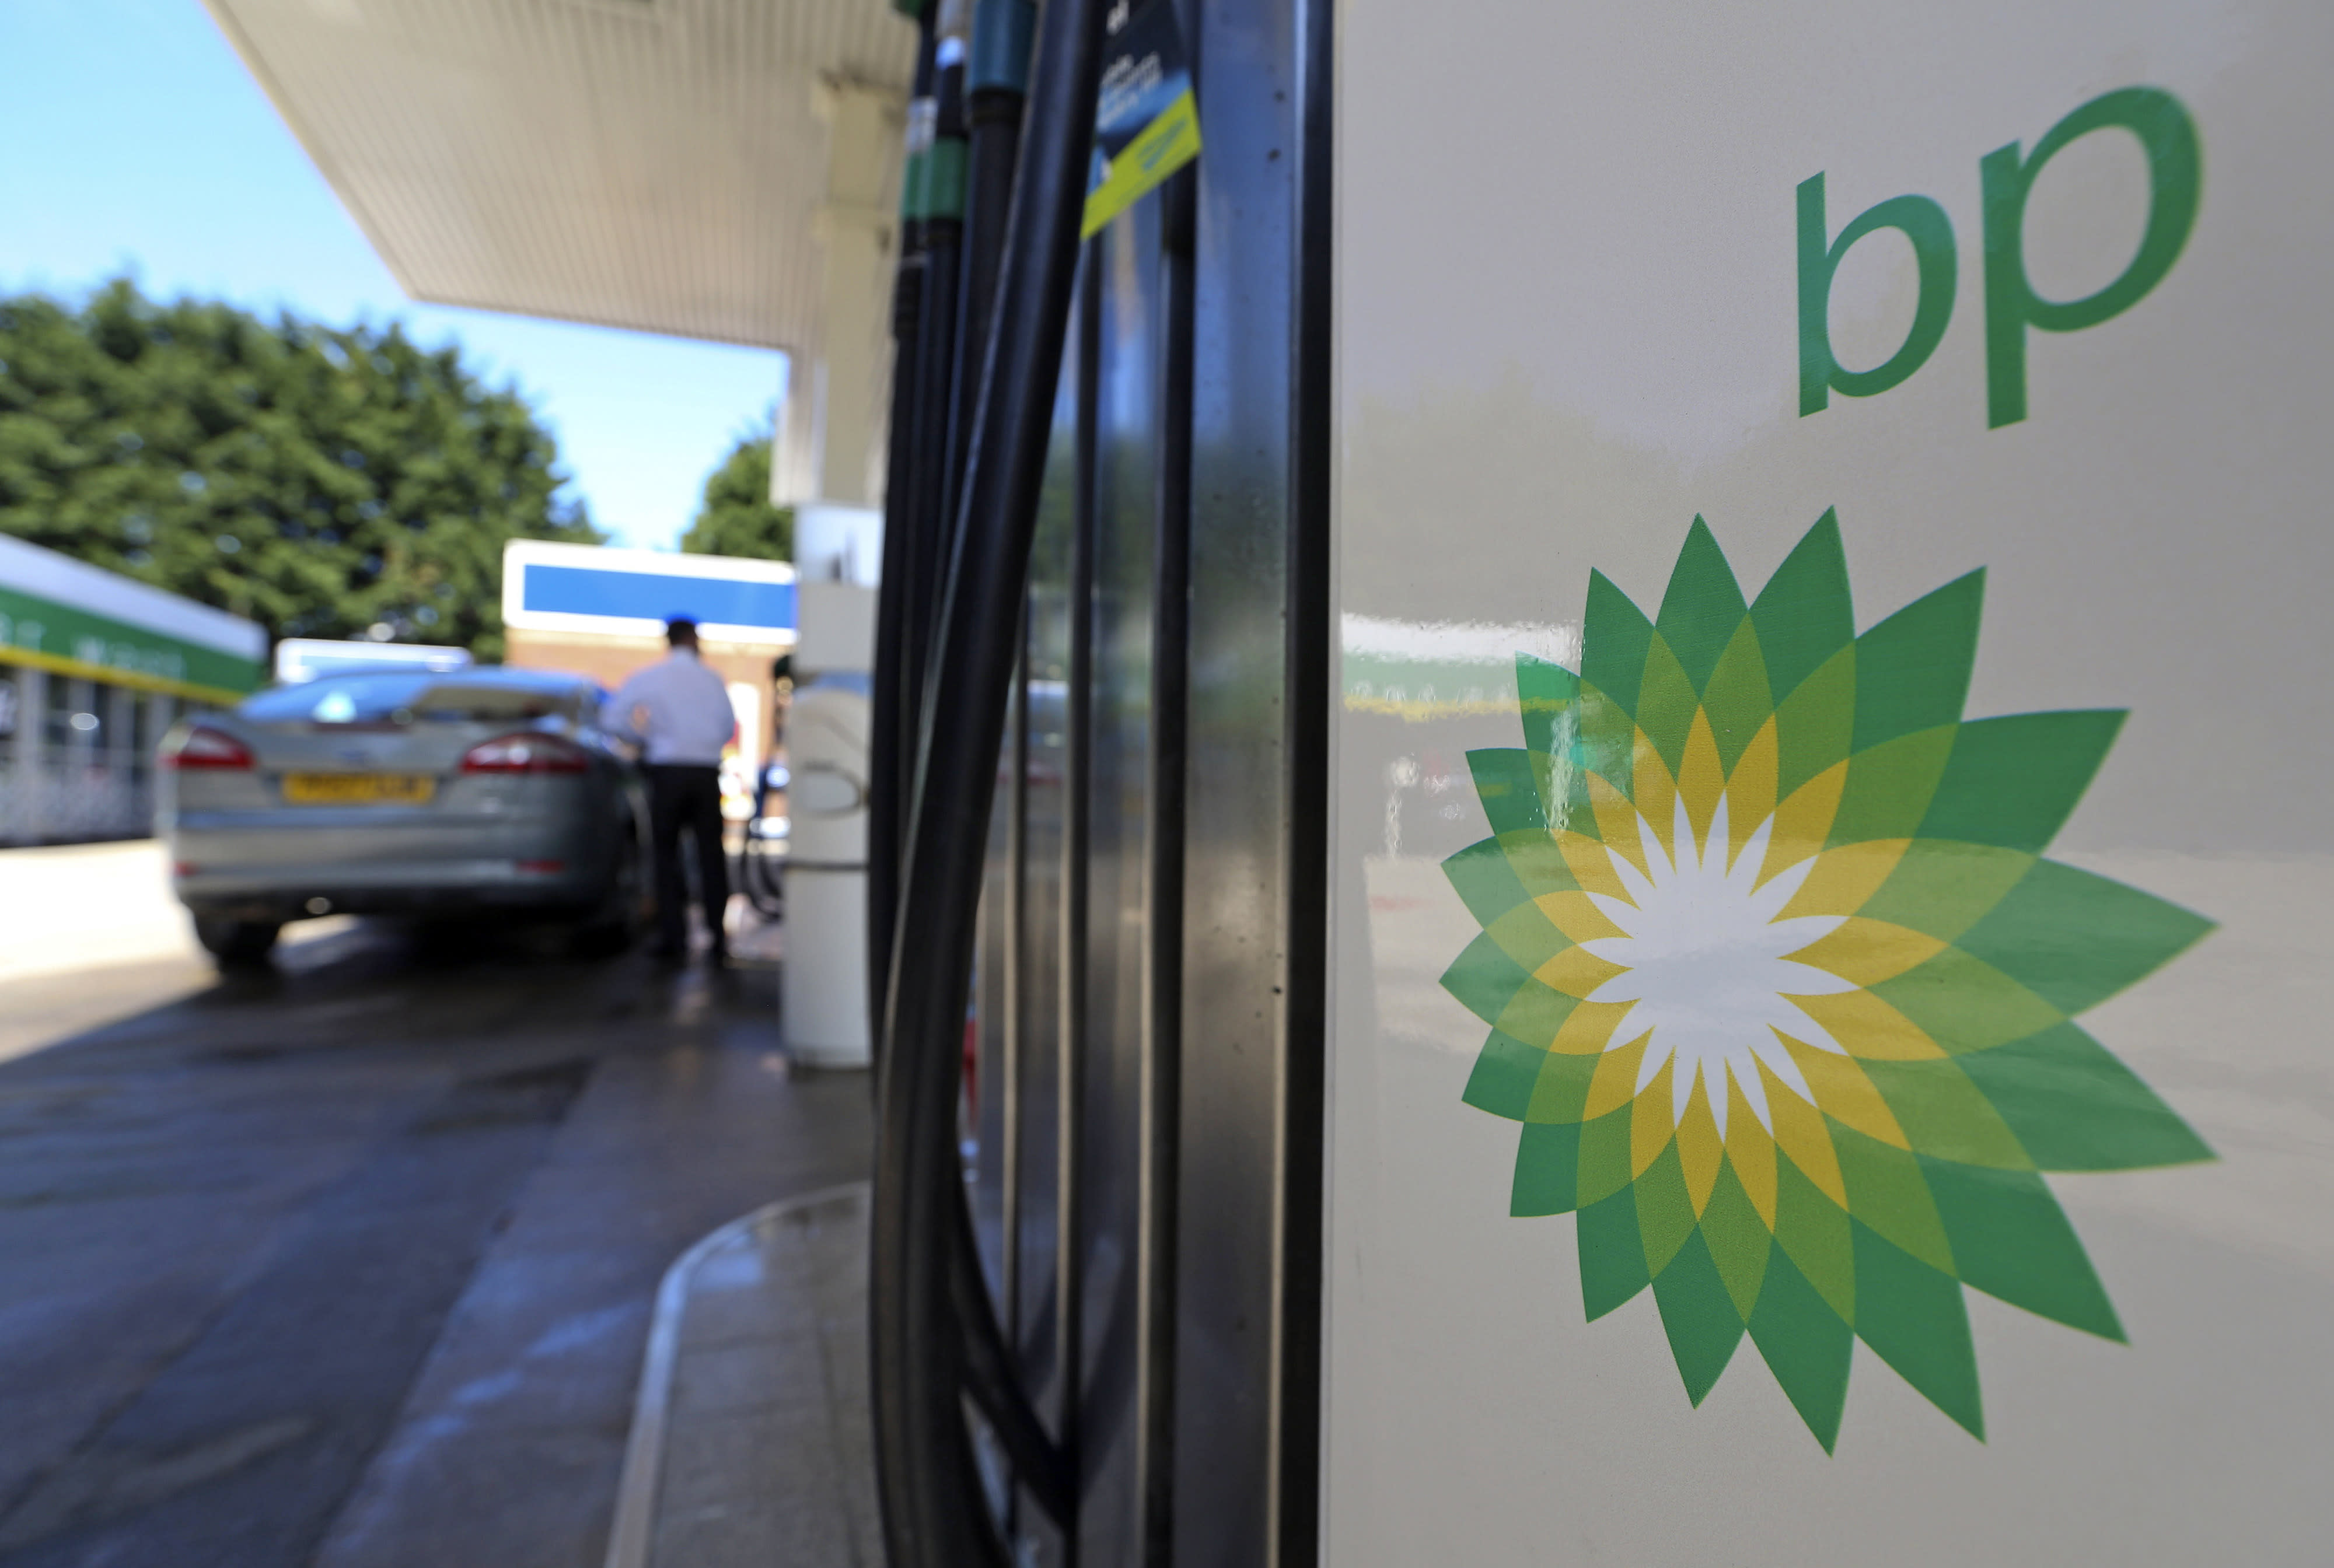 BP reports first full-year loss in decade after “brutal” year